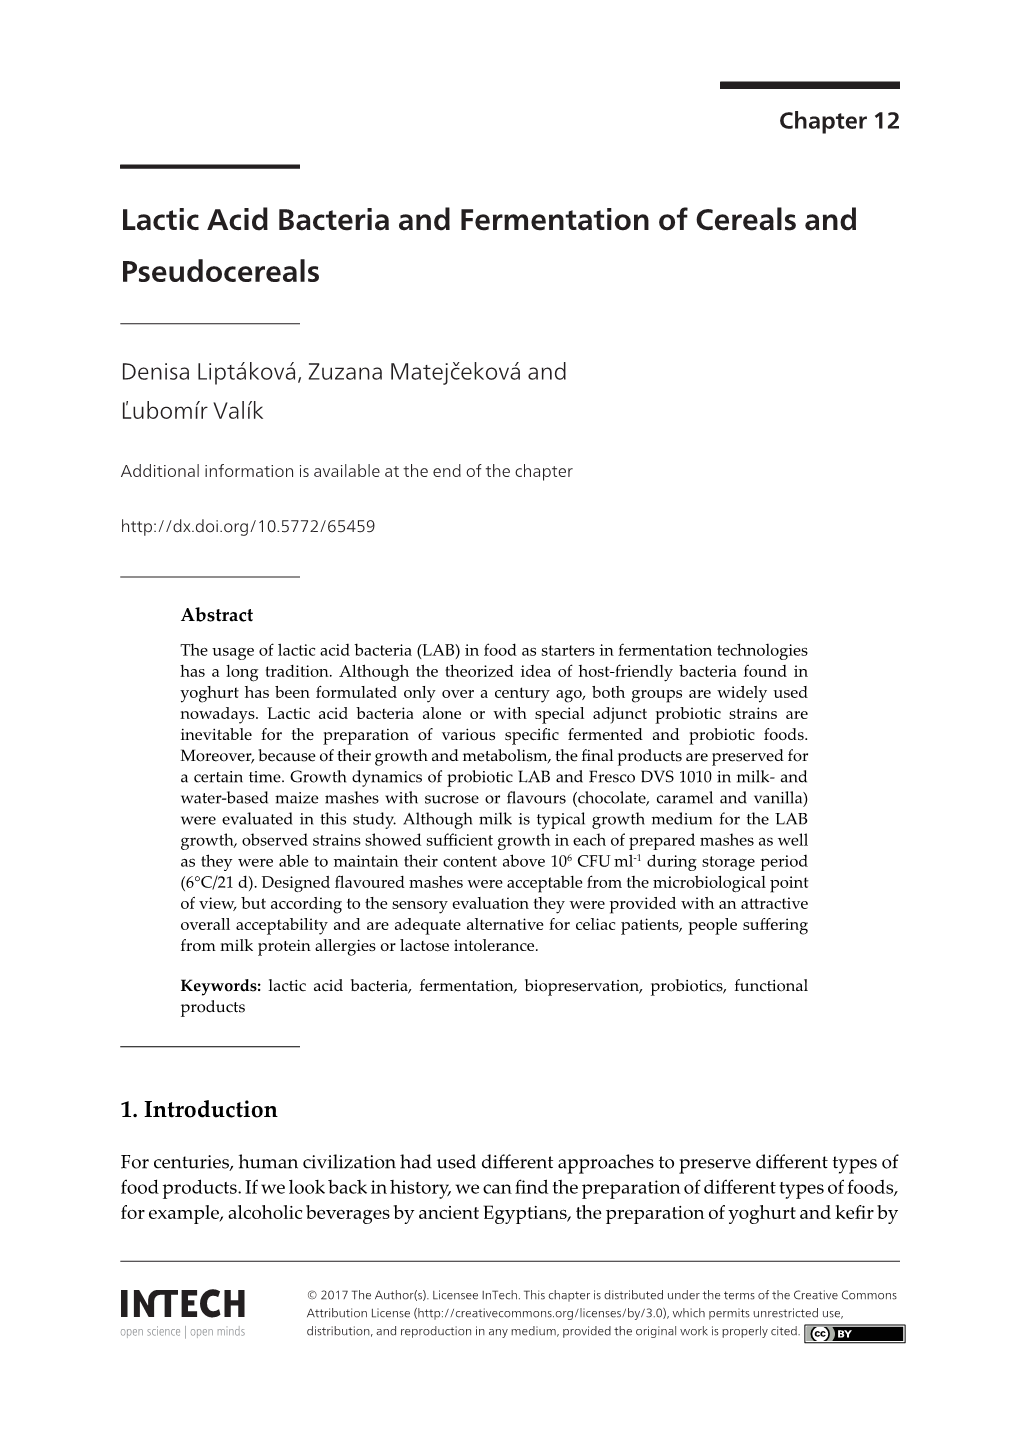 Lactic Acid Bacteria and Fermentation of Cereals and Pseudocereals 225